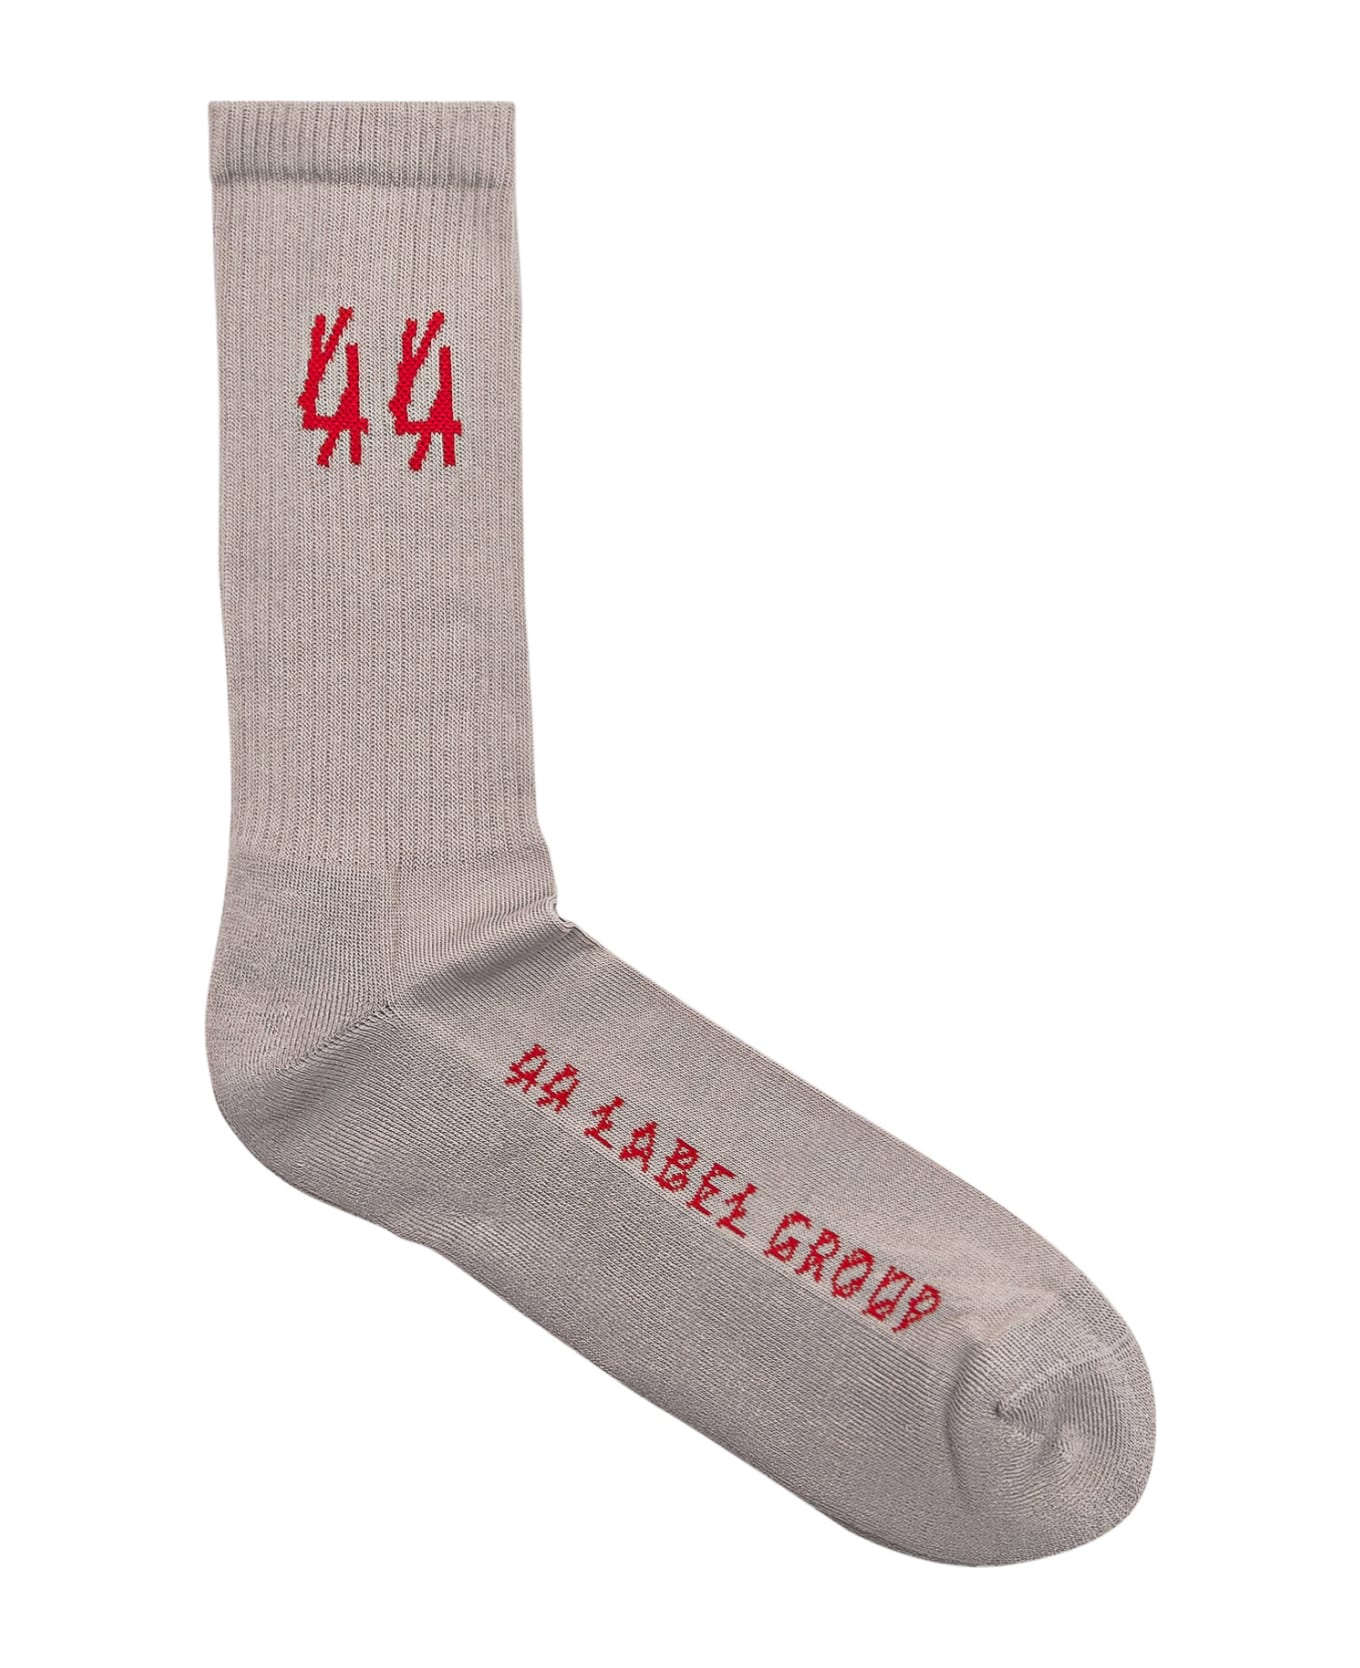 44 Label Group Socks With Logo - GYPS 44 RISK RED 靴下